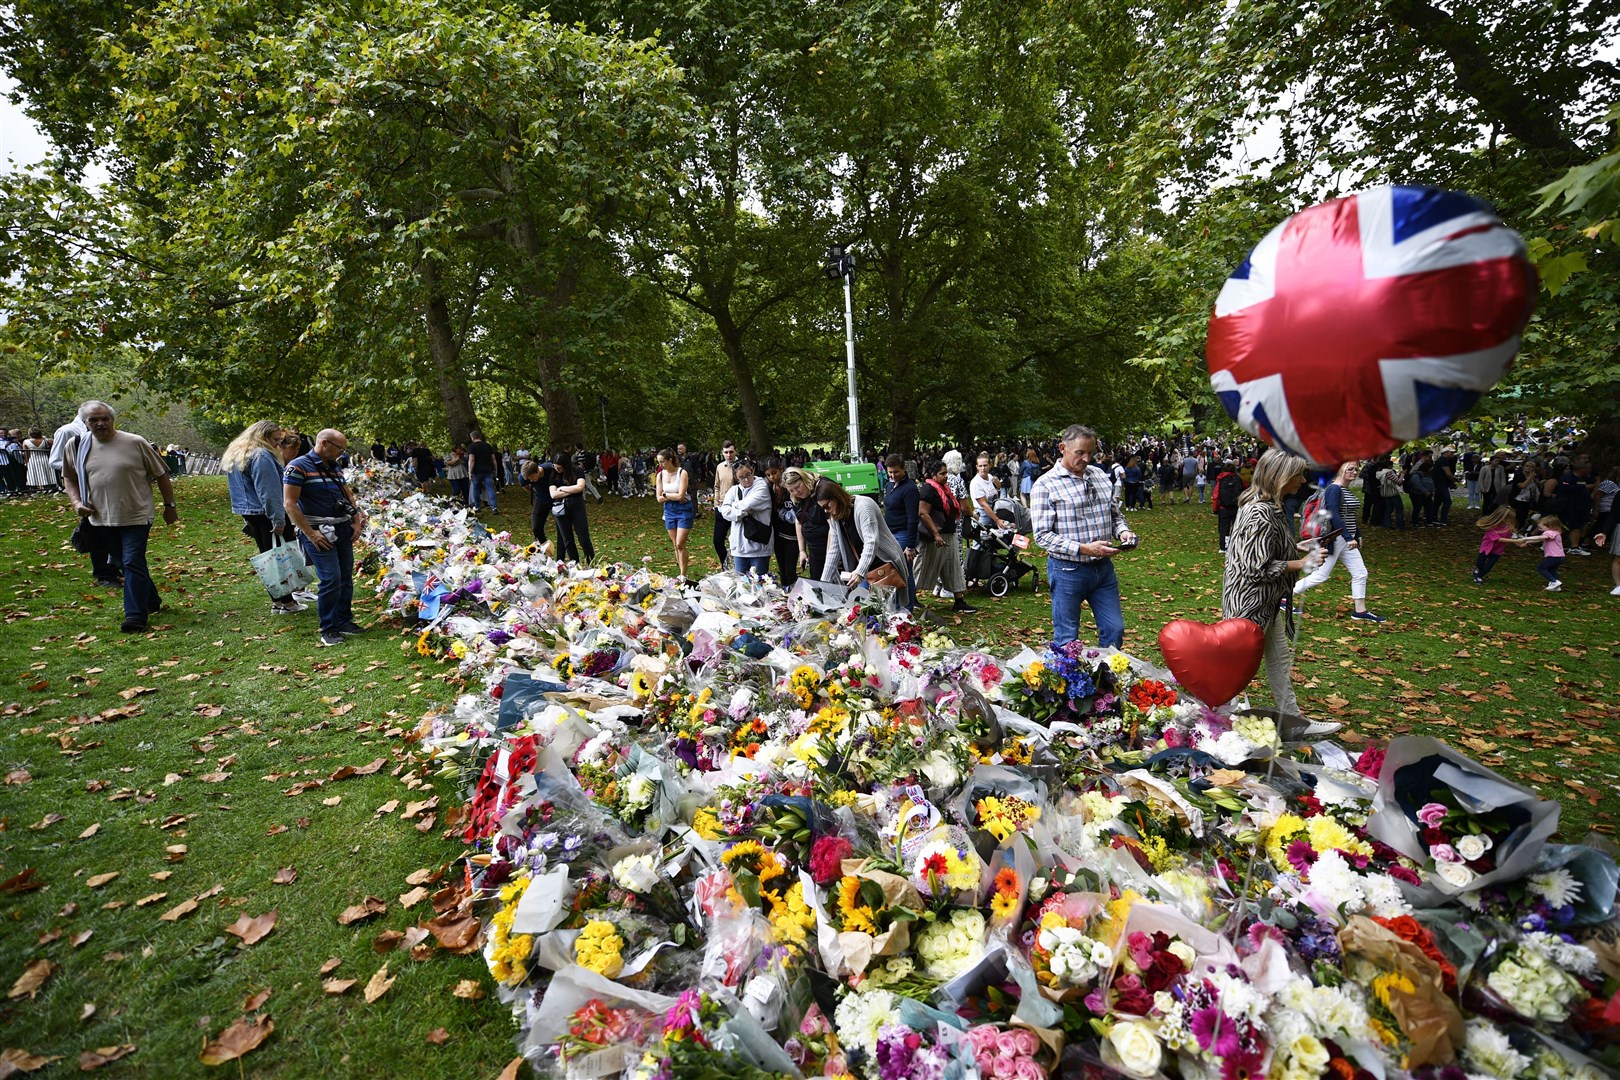 A bank of floral tributes in Green Park next to Buckingham Palace (Beresford Hodge/PA)